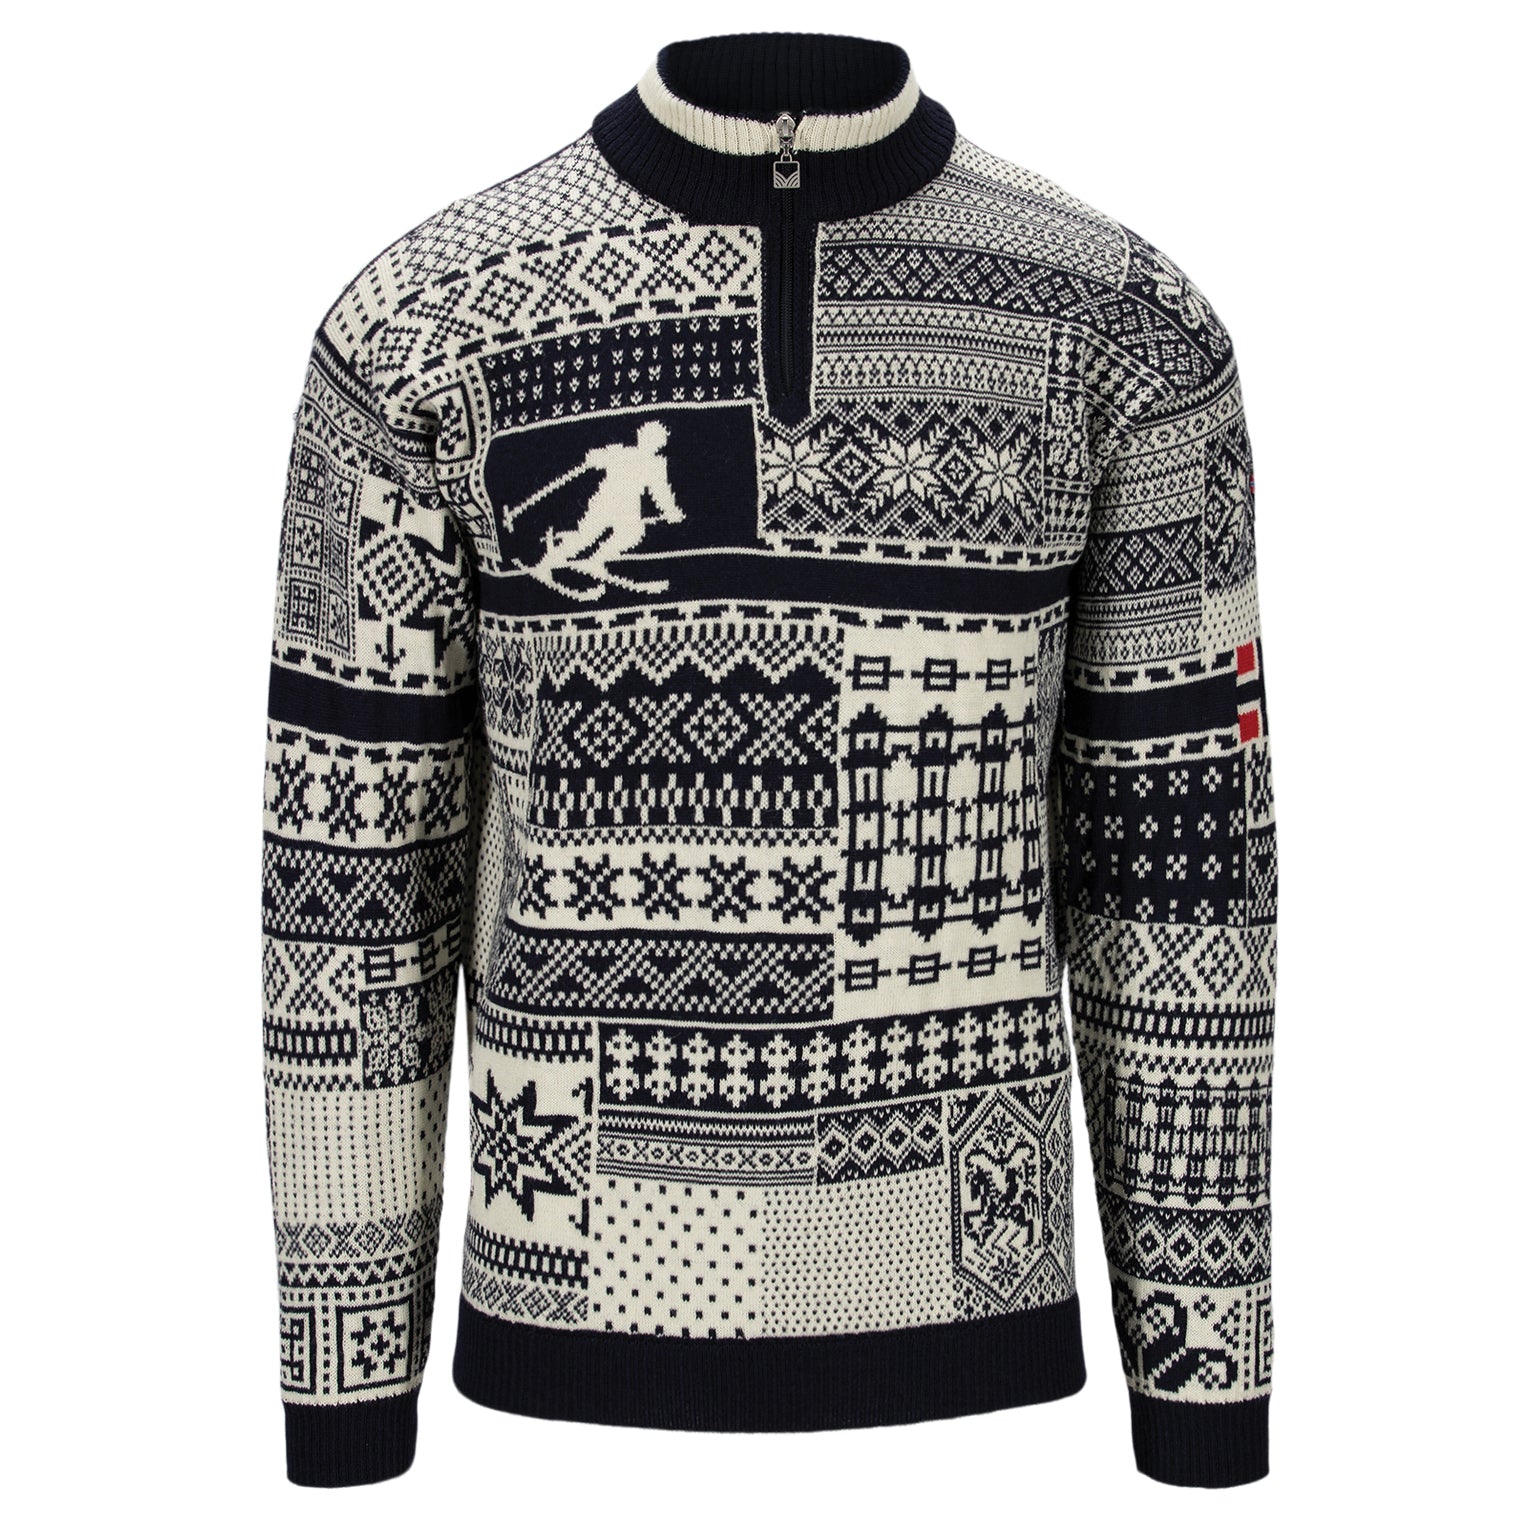 OL History Unisex Sweater by Dale of Norway